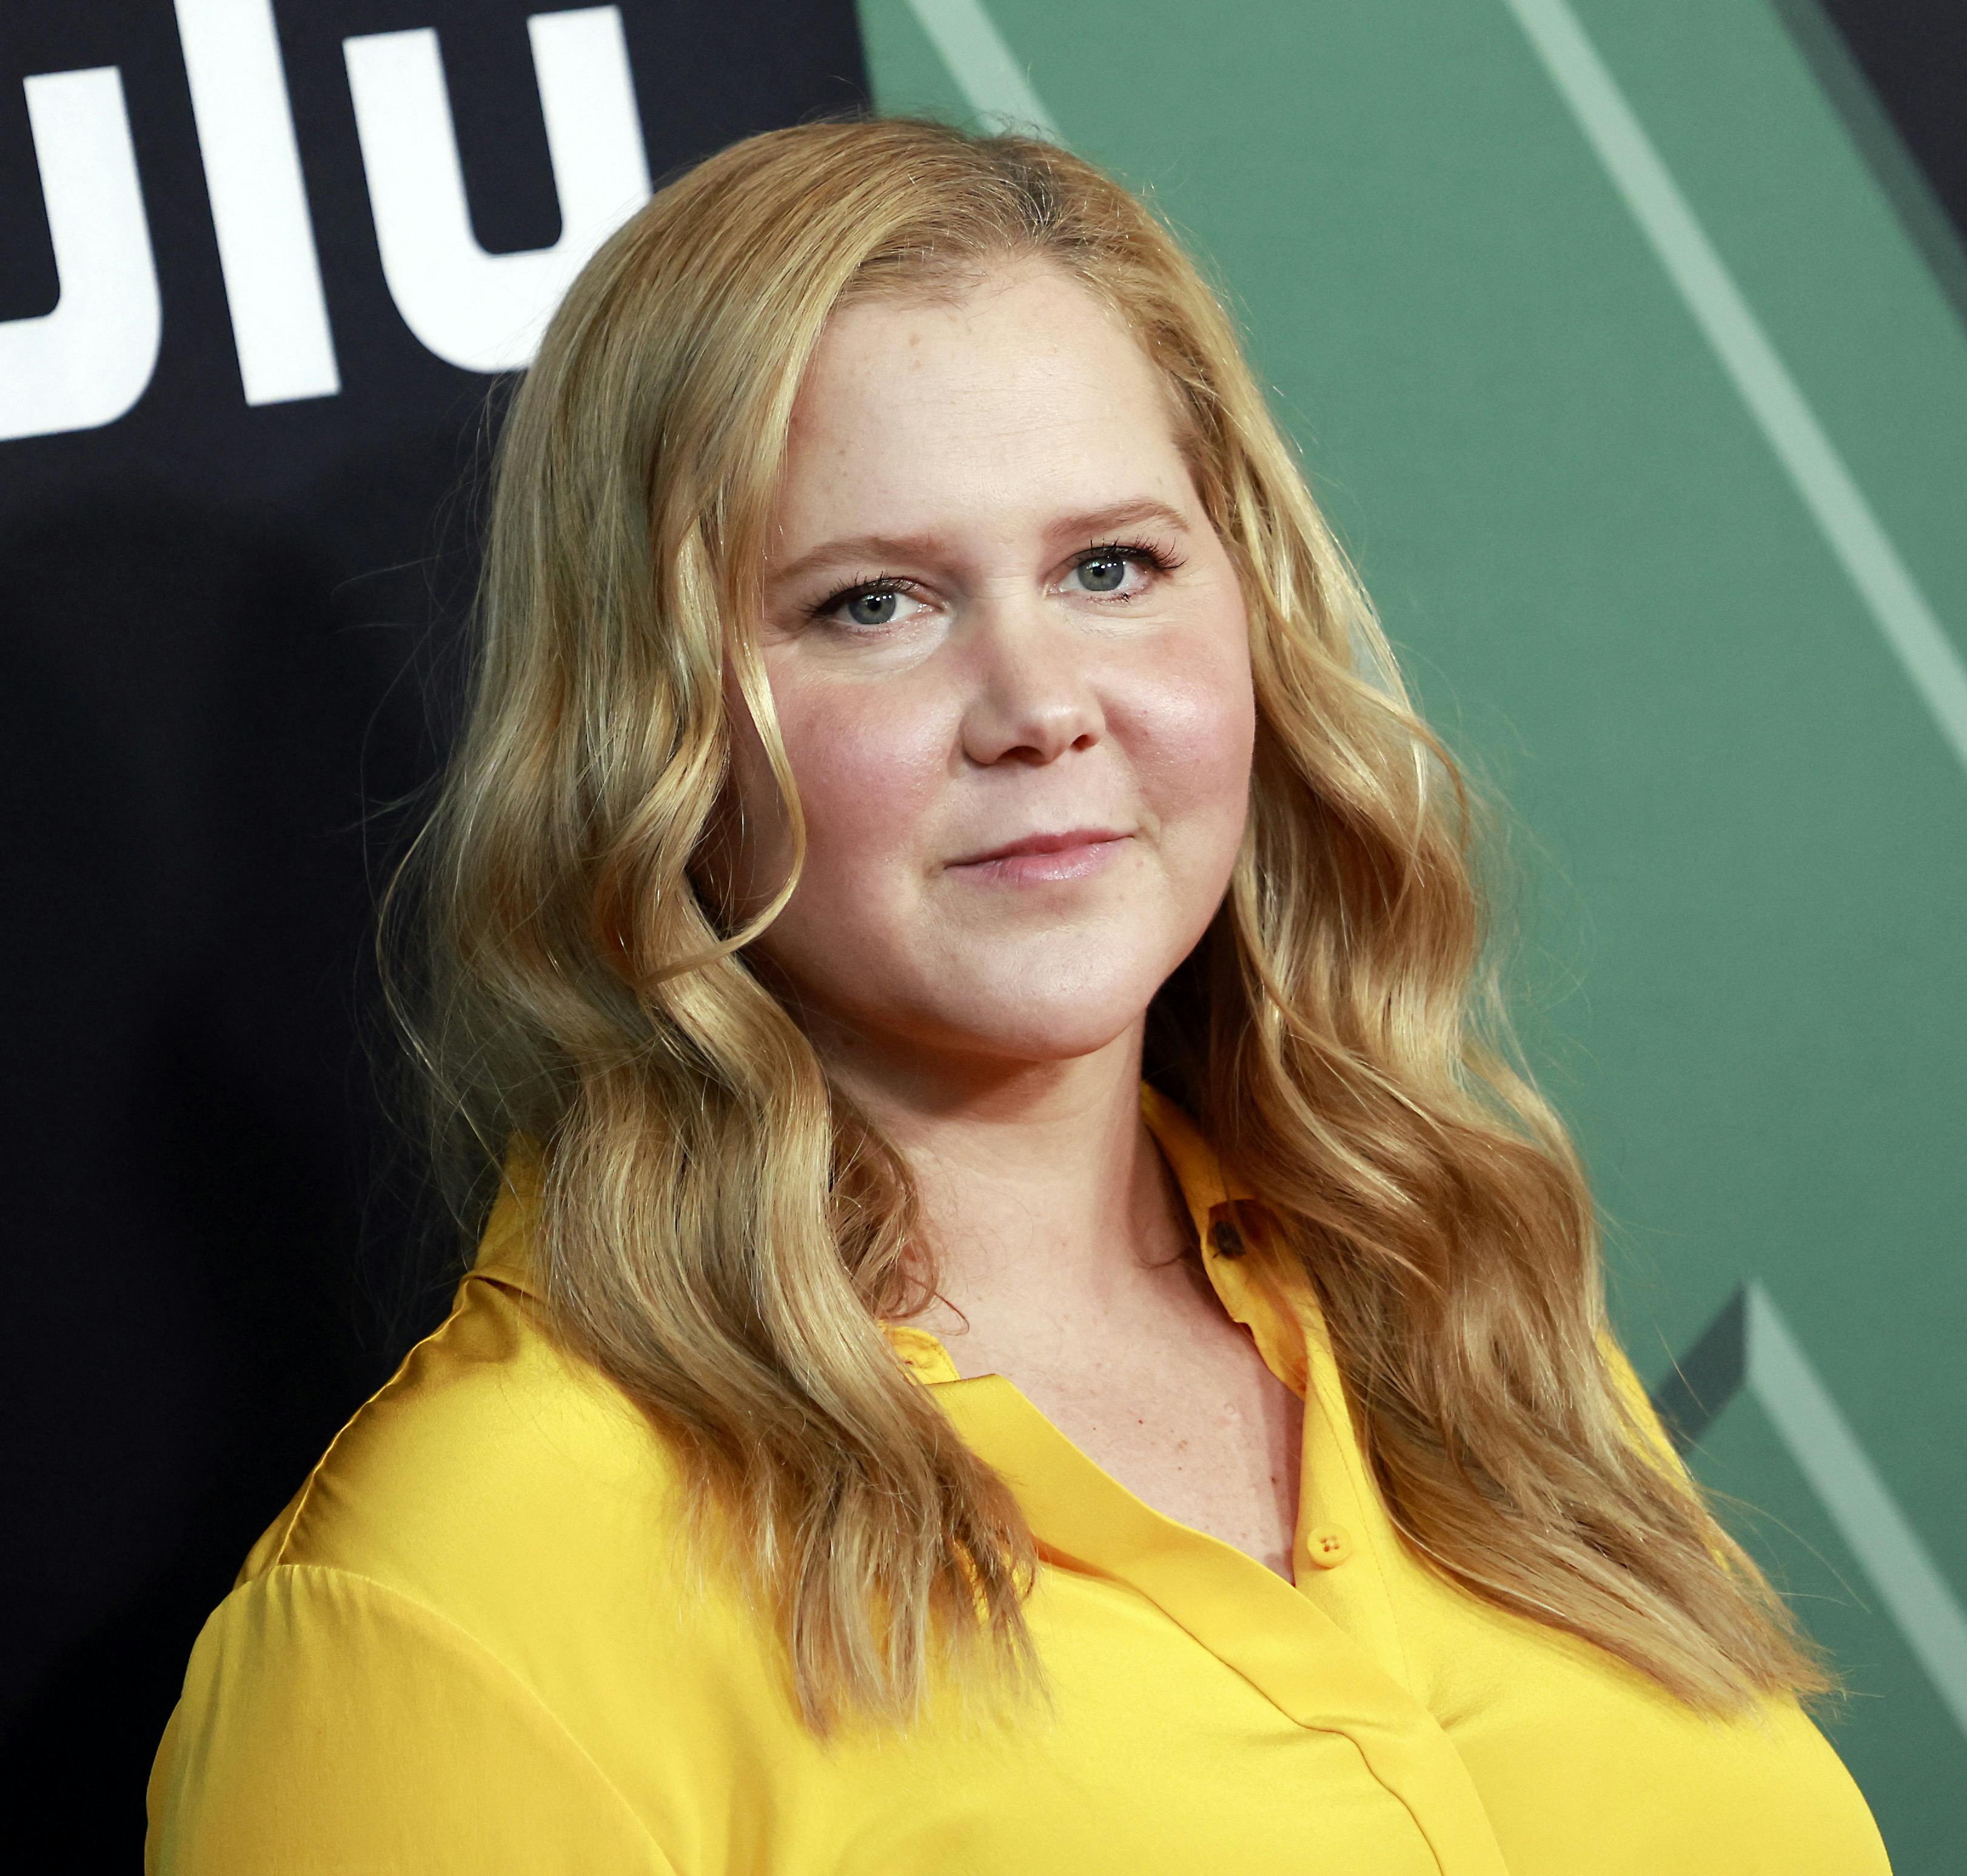 US actress Amy Schumer arrives to the premiere of "Only Murders in the Building" season 2 at the Directors Guild of America in Los Angeles, California on June 27, 2022. Michael Tran / AFP